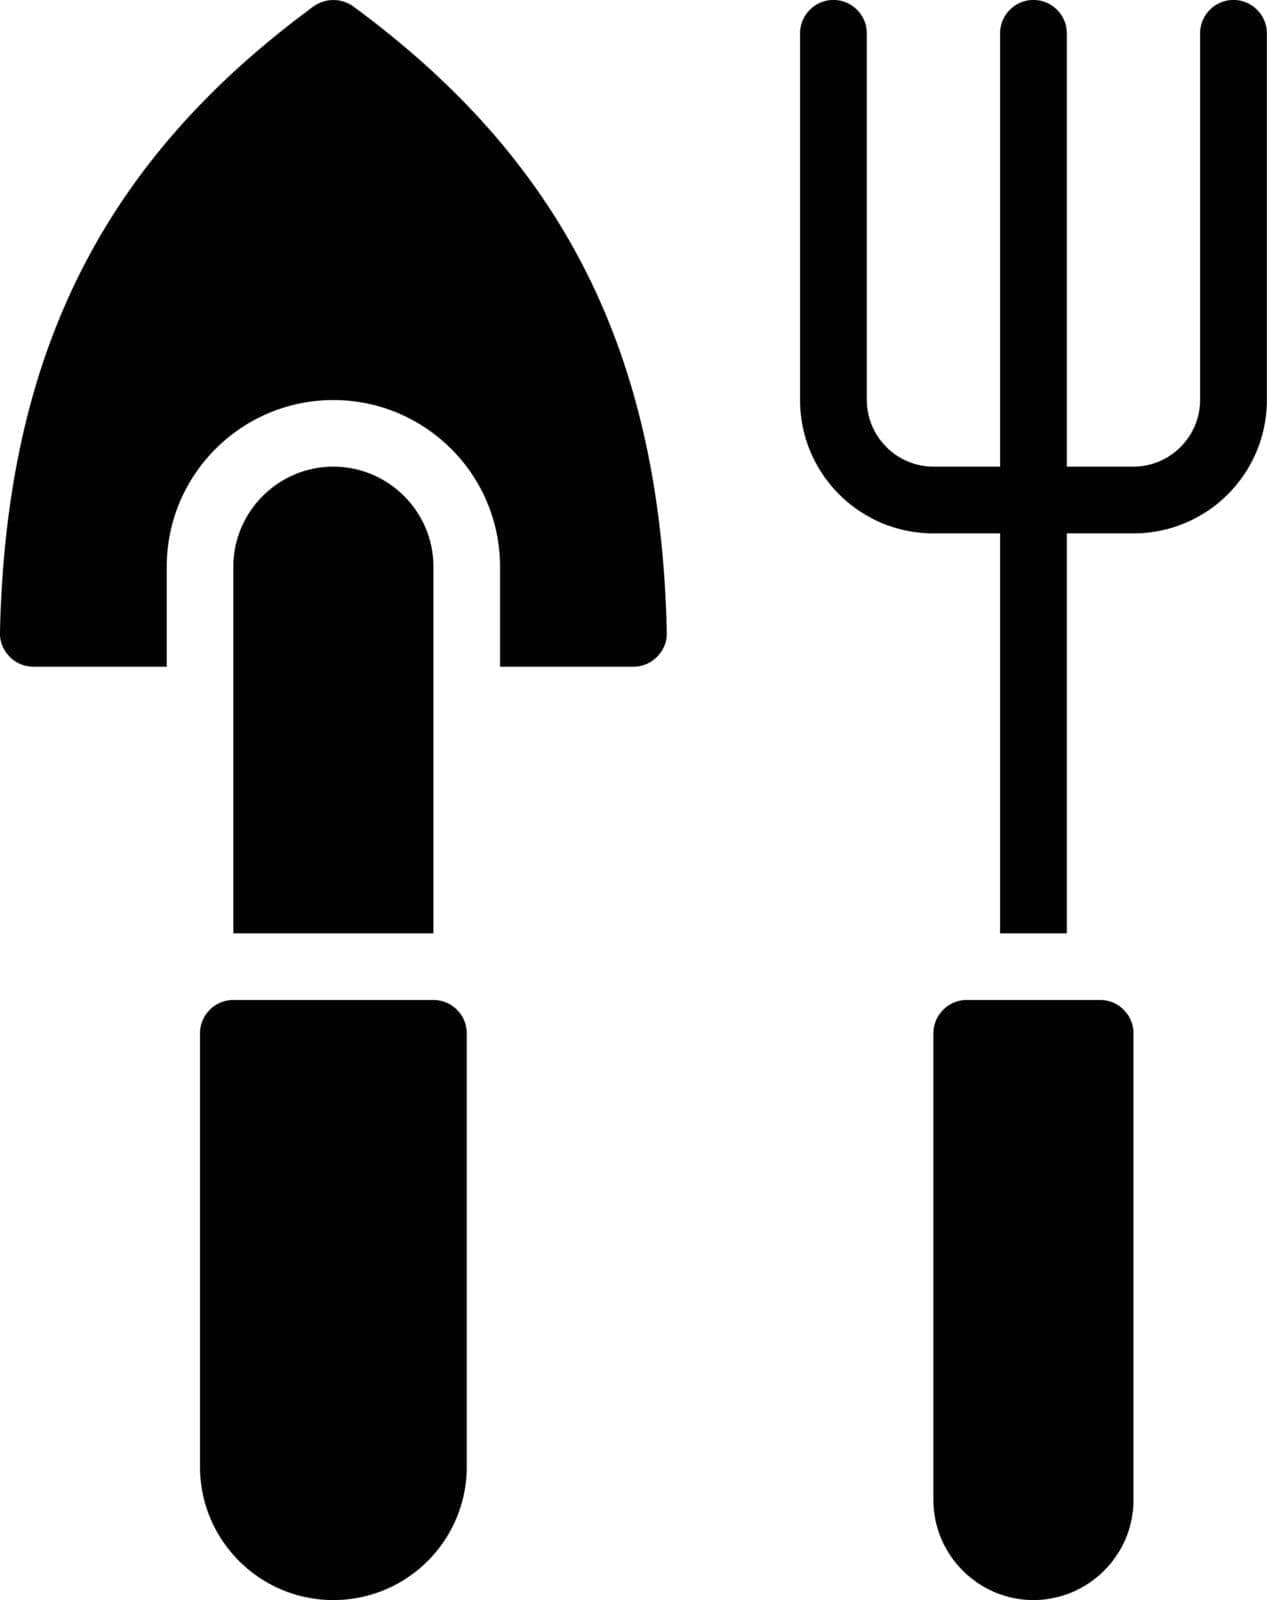 shovel Vector illustration on a transparent background. Premium quality symbols. Glyphs vector icon for concept and graphic design.